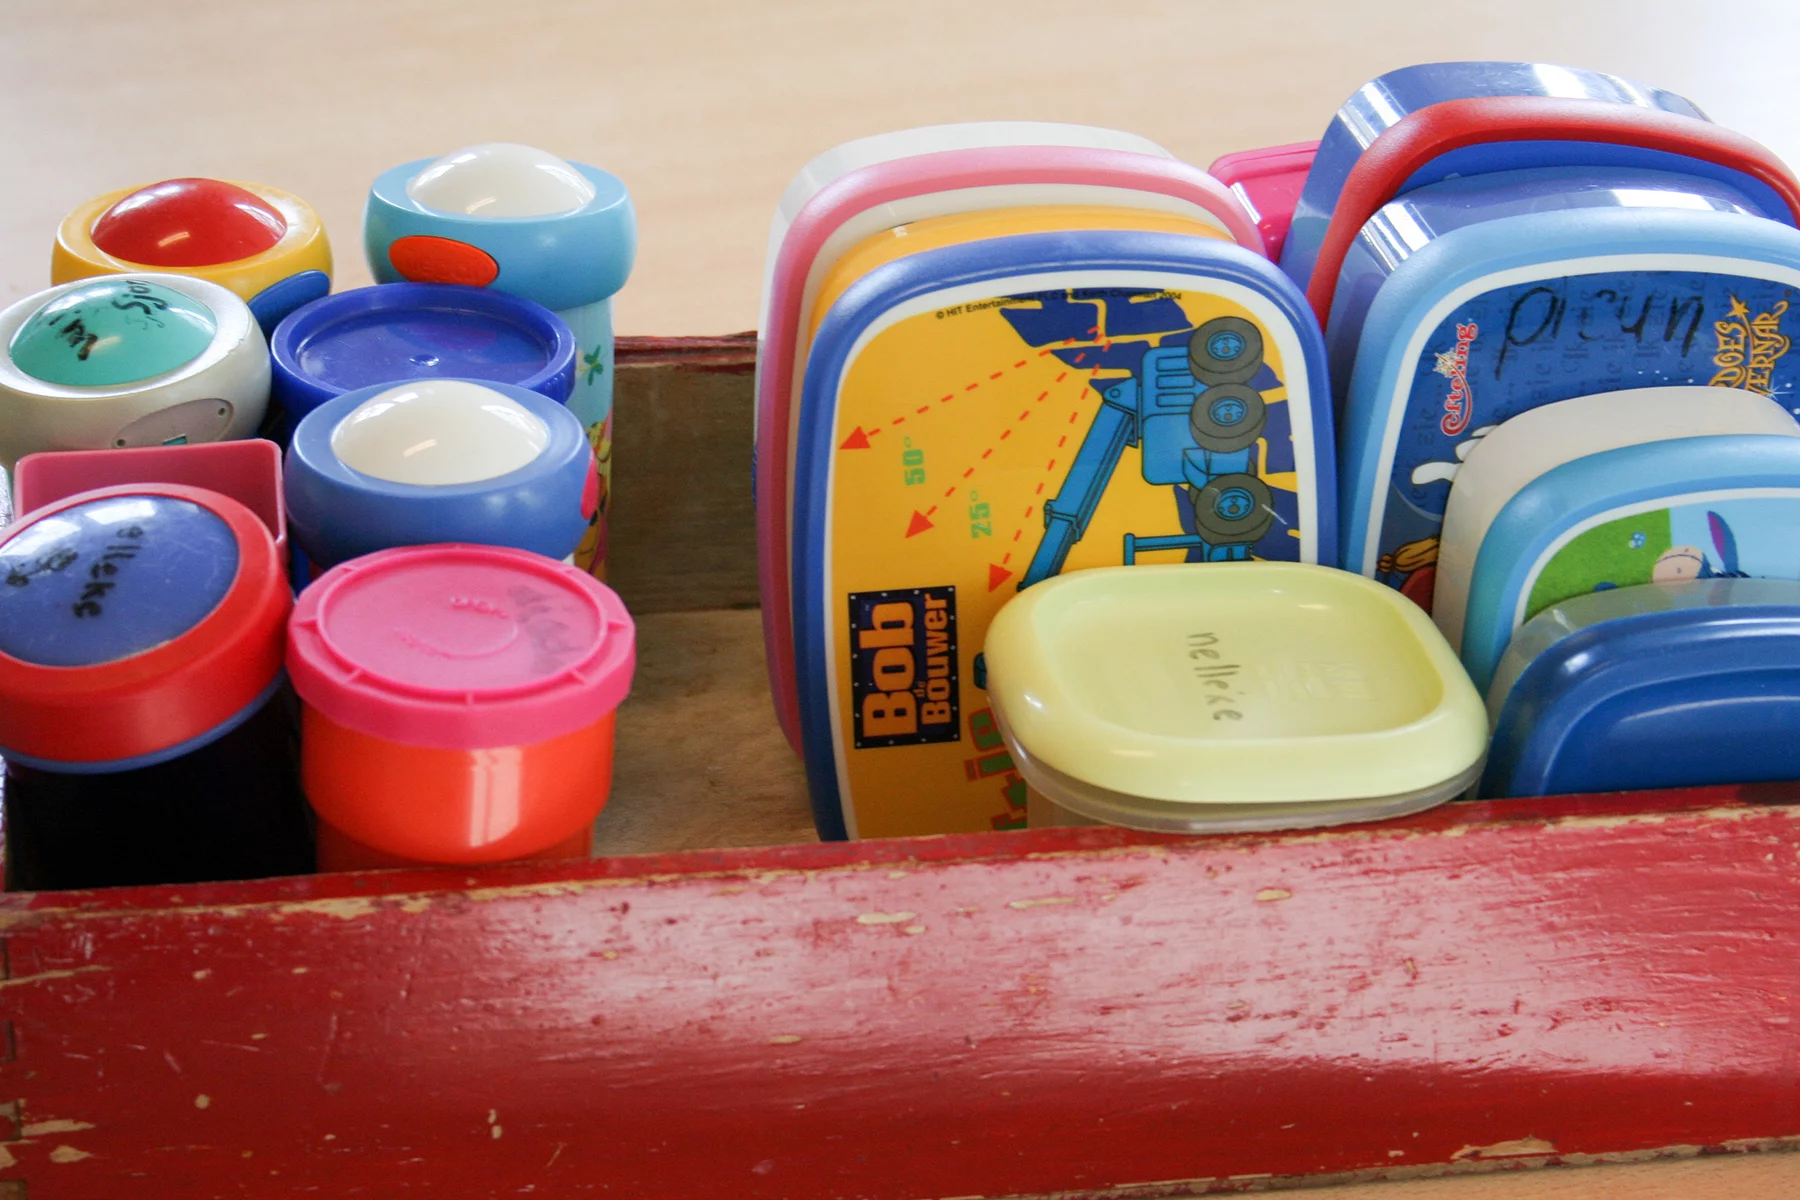 A collection of student lunchboxes at a Dutch school